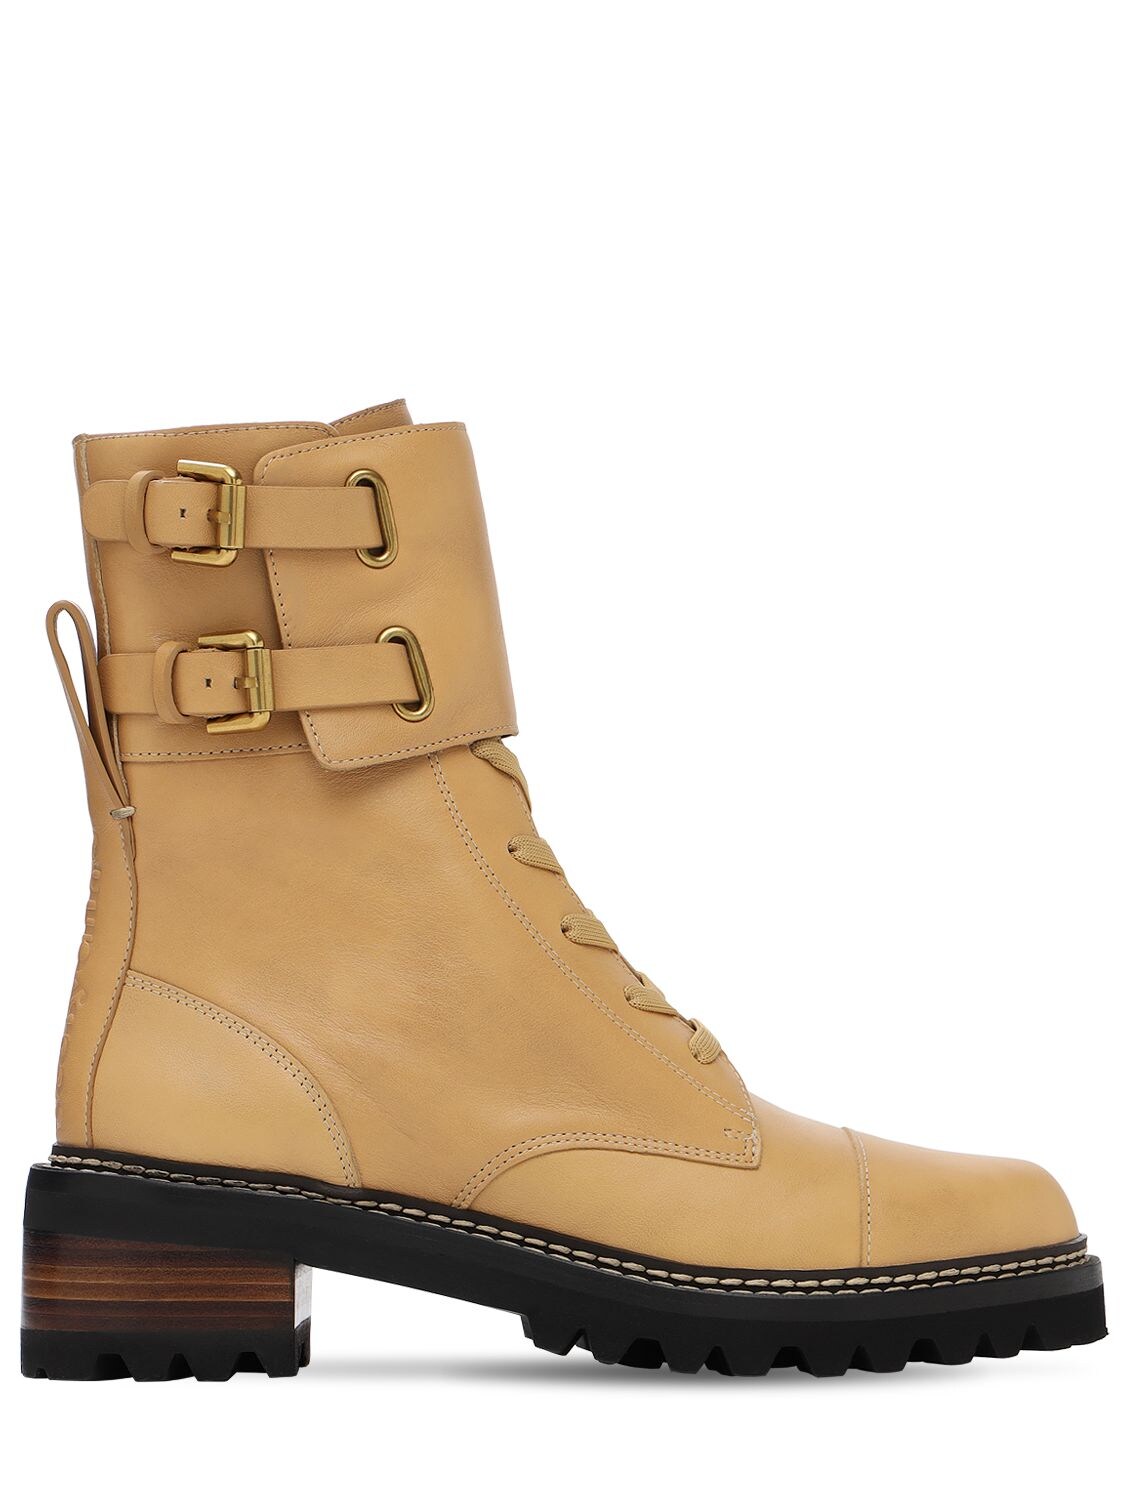 SEE BY CHLOÉ 40MM MALLORY LEATHER ANKLE BOOTS,72IL4L002-MTIWMDM1